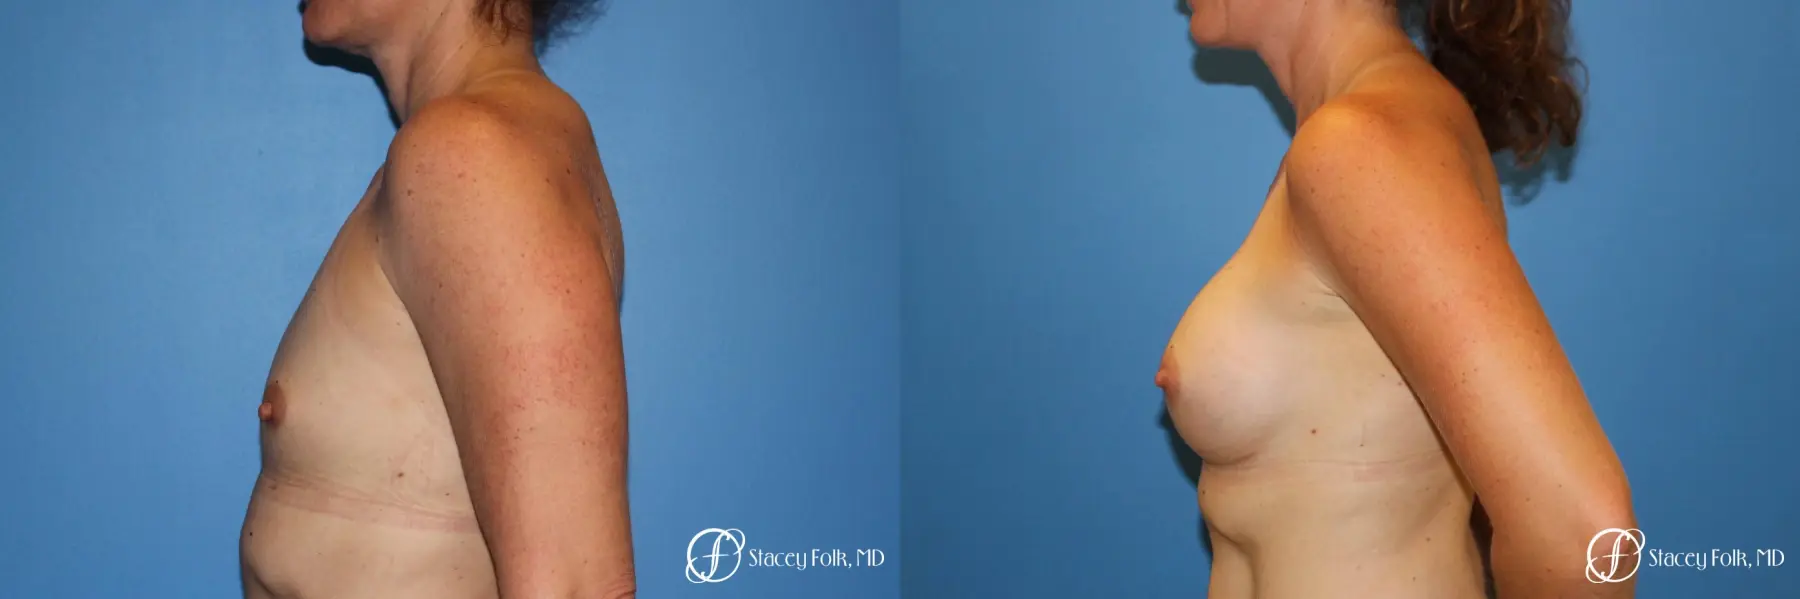 Denver Breast Augmentation 6611 - Before and After 3